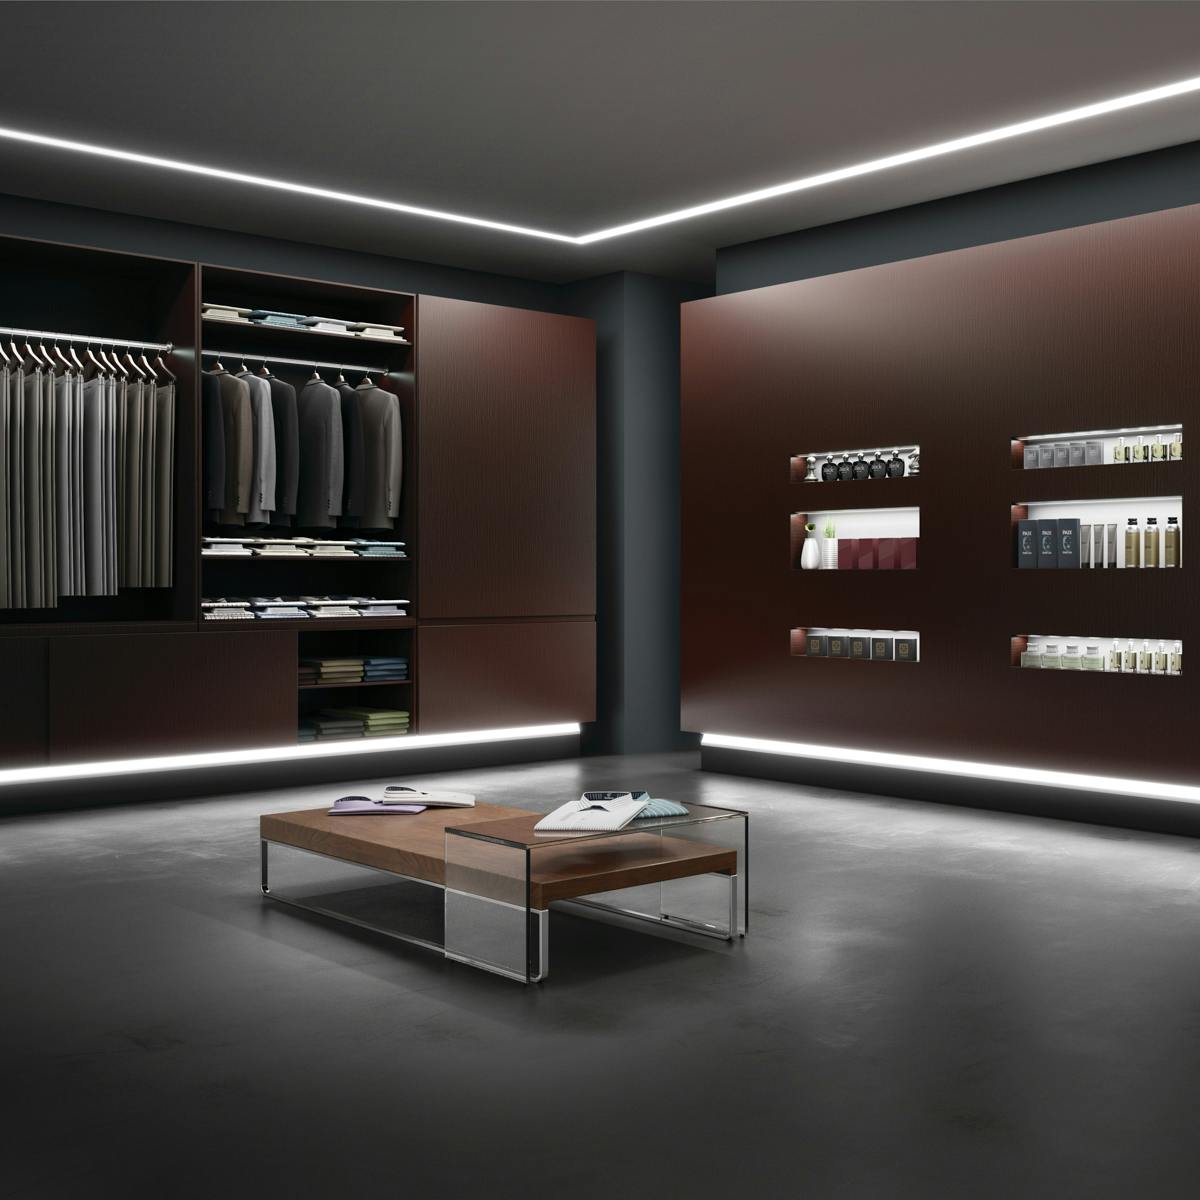 Retail setting with extruded channel lighting all on